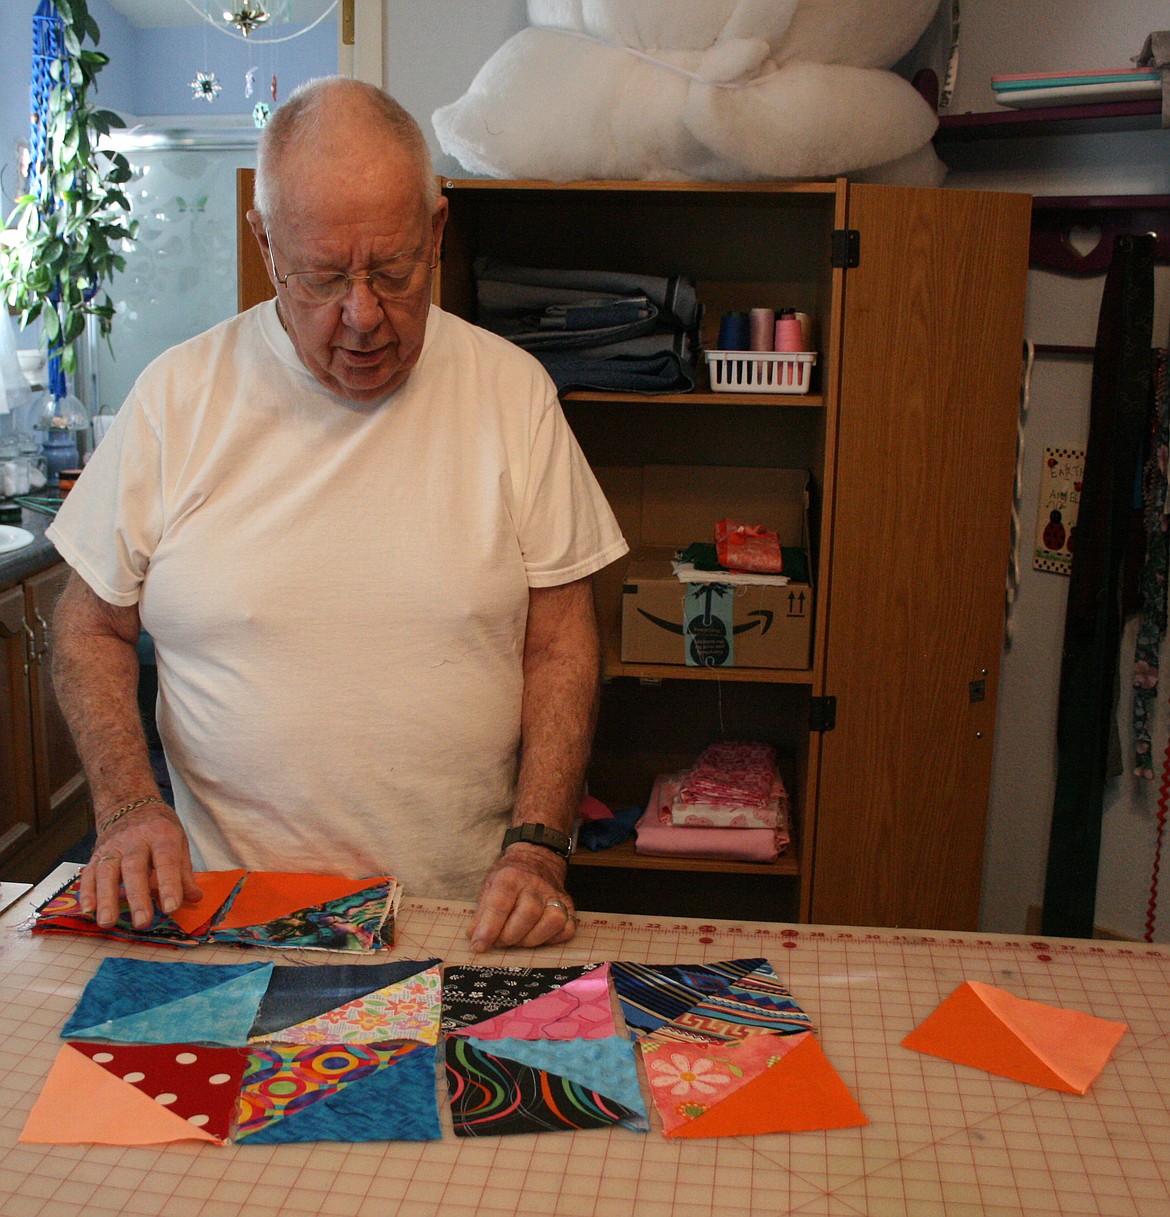 Mel Neal checks the design of a new quilt. Neal and his wife Max have made more than 800 quilts they donated to the Columbia Basin Cancer Foundation.